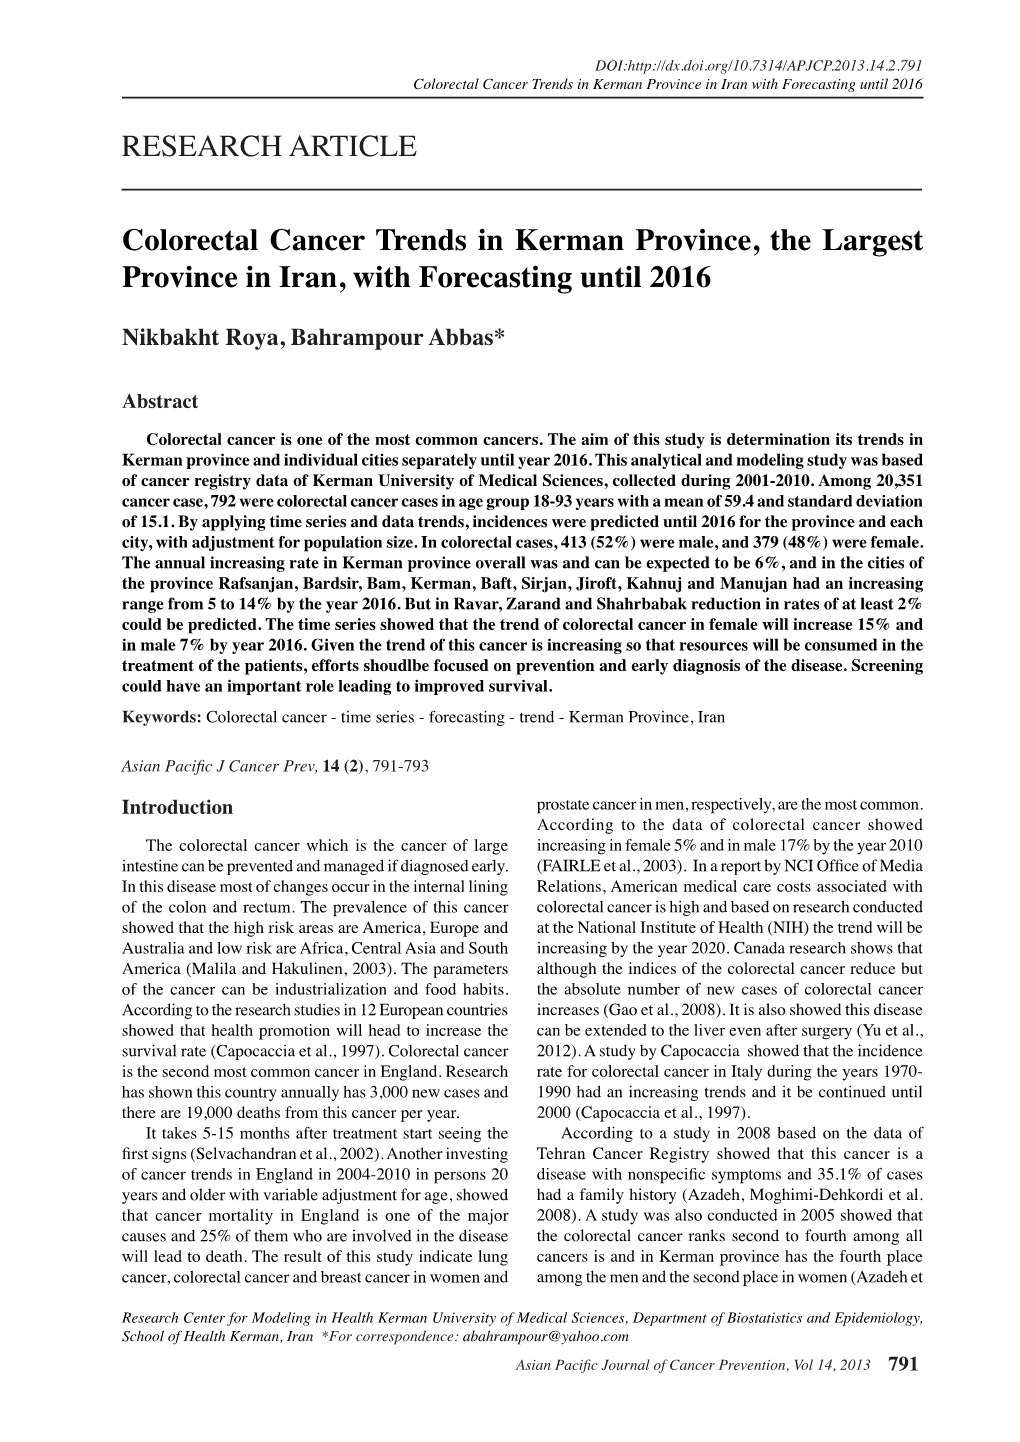 Colorectal Cancer Trends in Kerman Province, the Largest Province in Iran, with Forecasting Until 2016